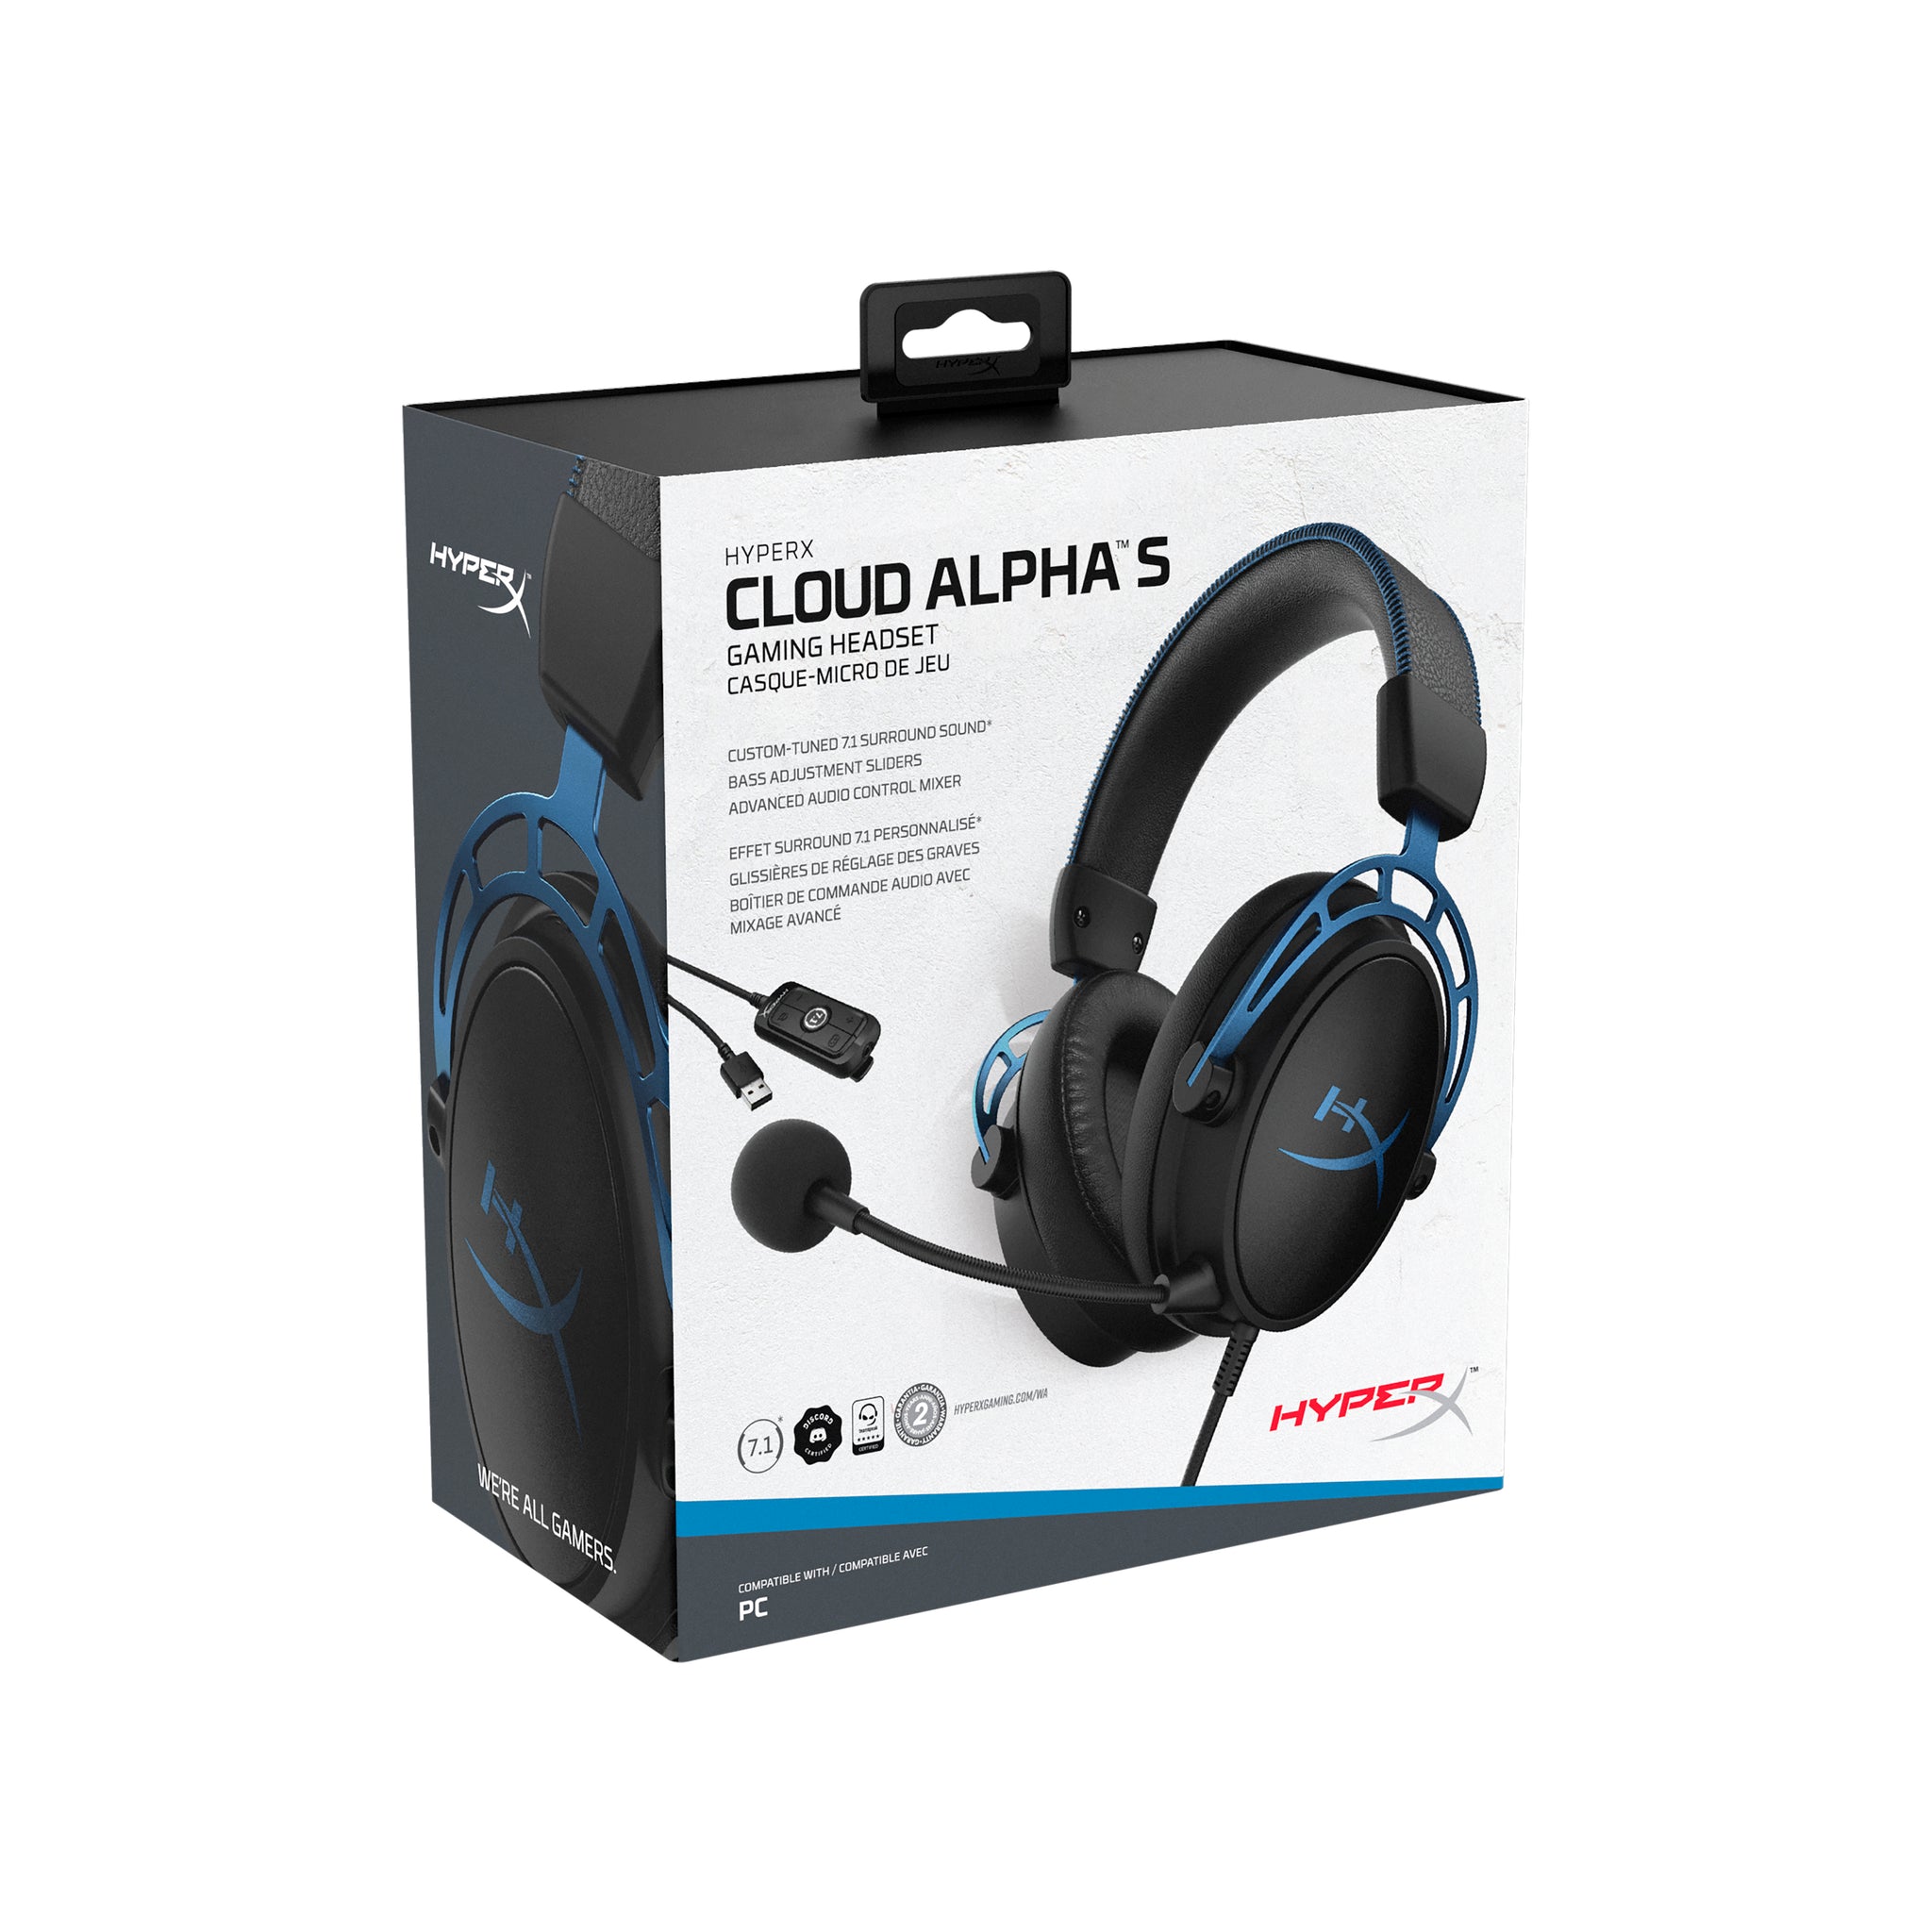 Vertrappen Portiek projector Cloud Alpha S – USB Gaming Headset with 7.1 Surround Sound | HyperX –  HyperX ROW